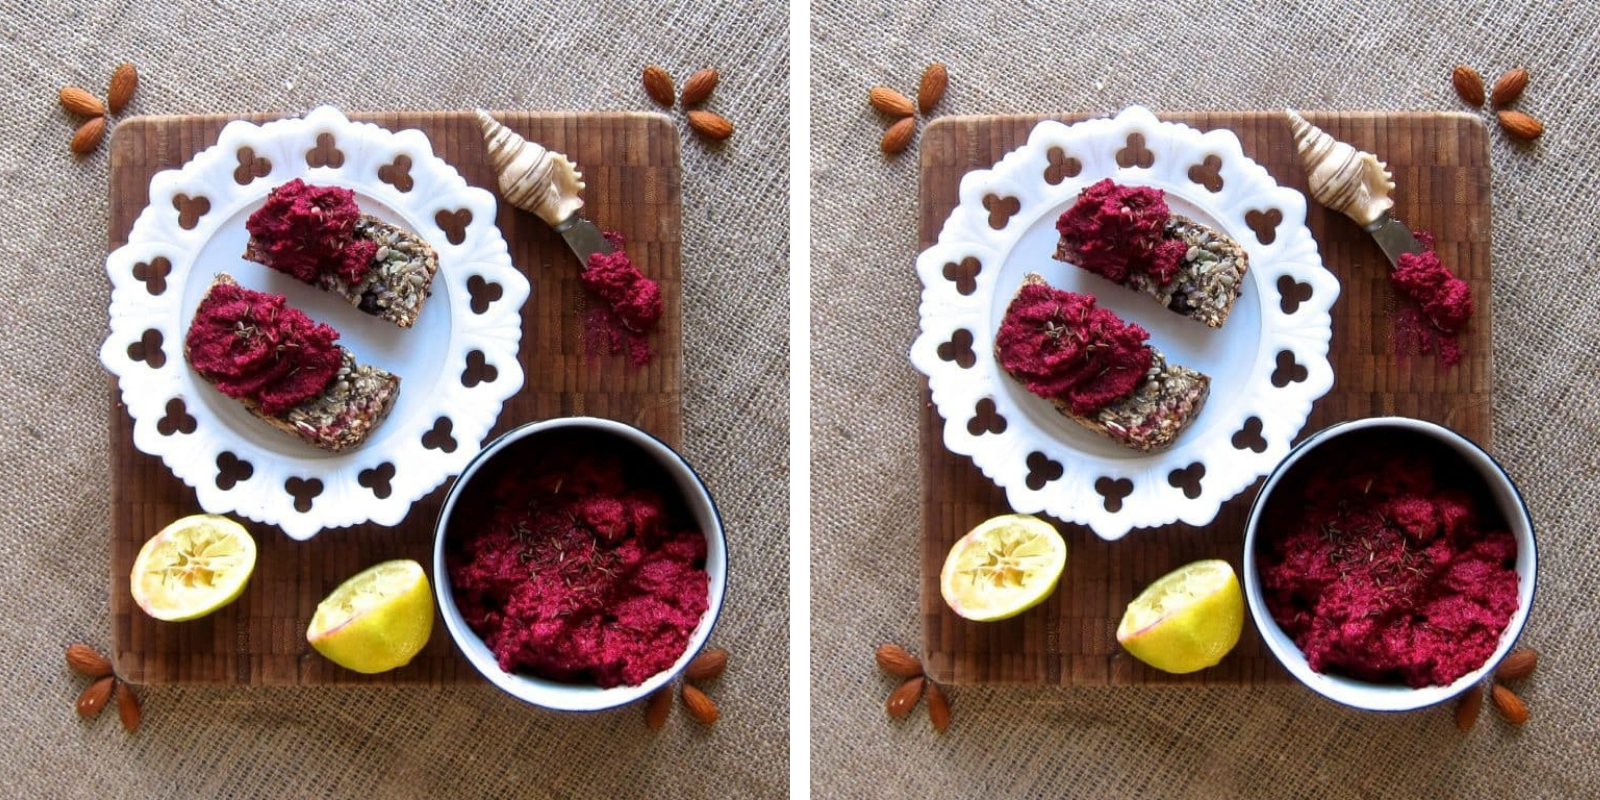 Recipe: The Fresh Ginger’s Activated Raw Beetroot Pâté